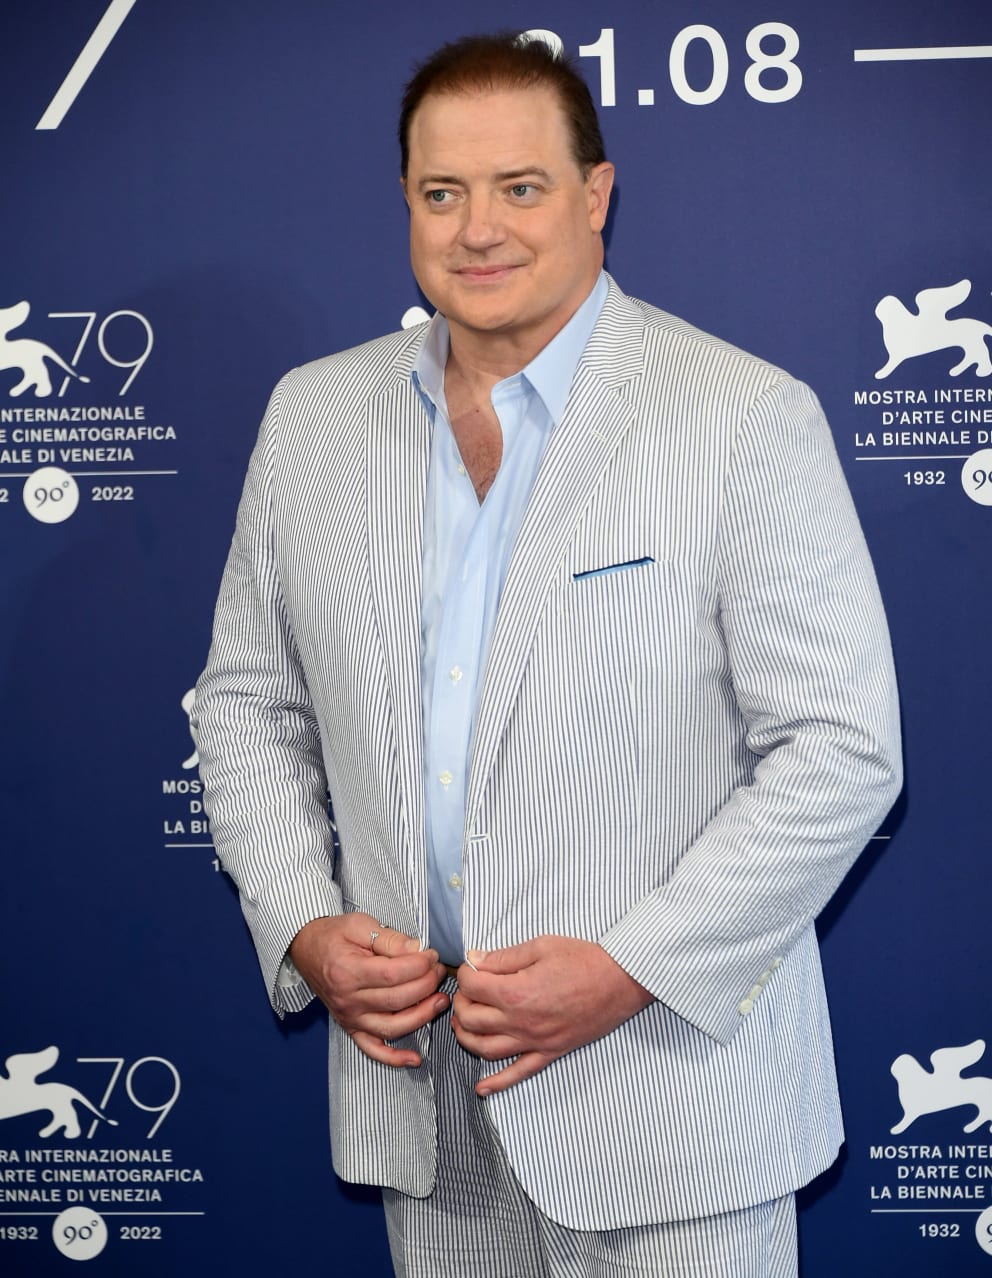 Attention, Camera!  Brendan Fraser quickly sucks his belly, clutching his striped jacket with a restrained smile